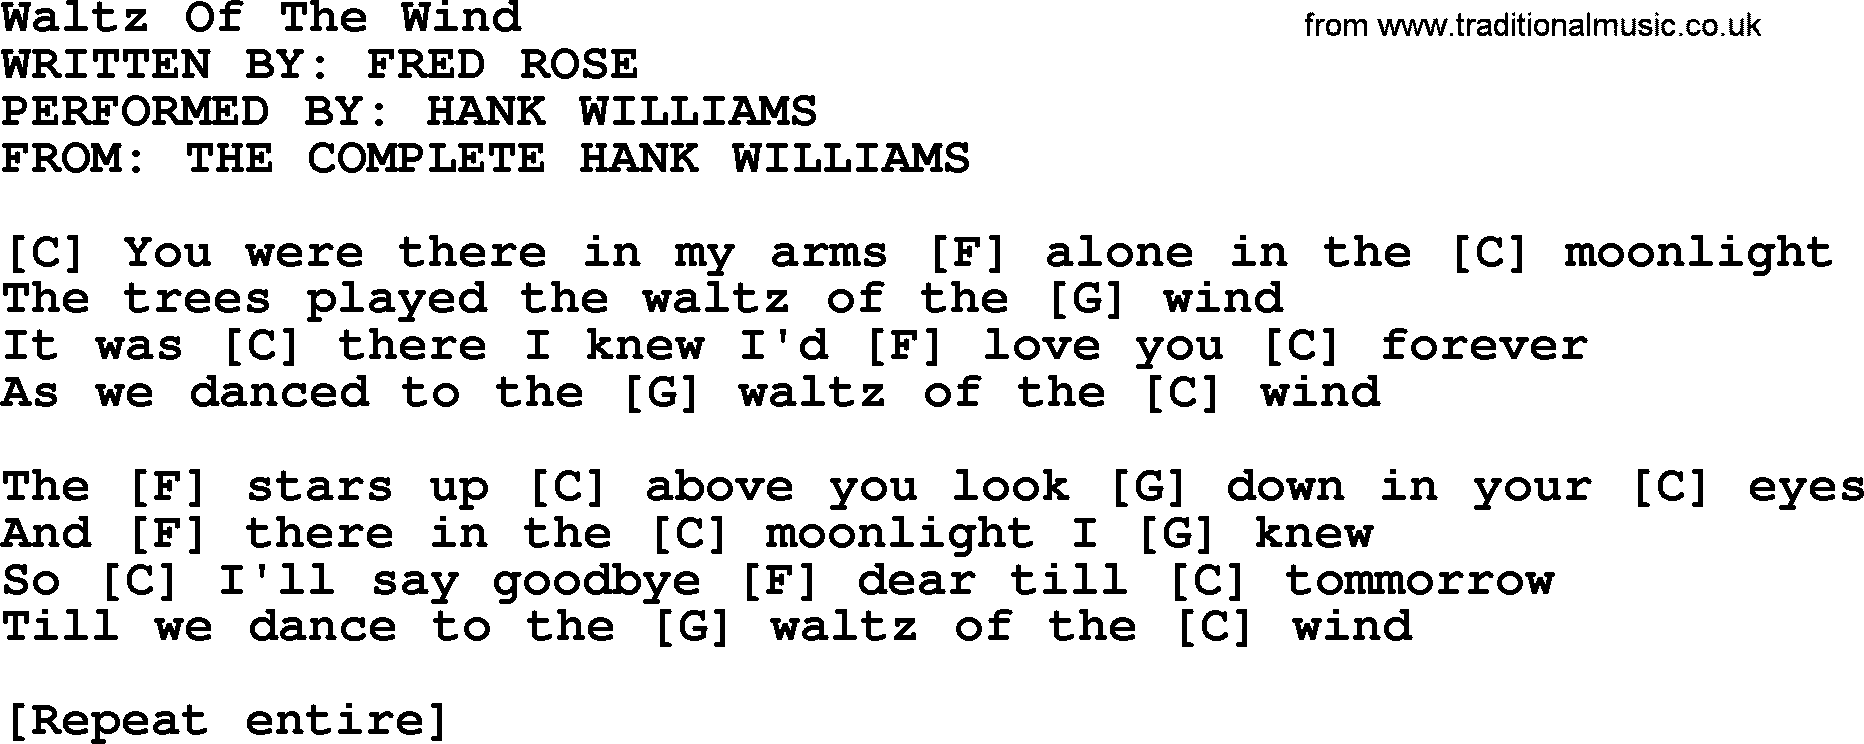 Hank Williams song Waltz Of The Wind, lyrics and chords